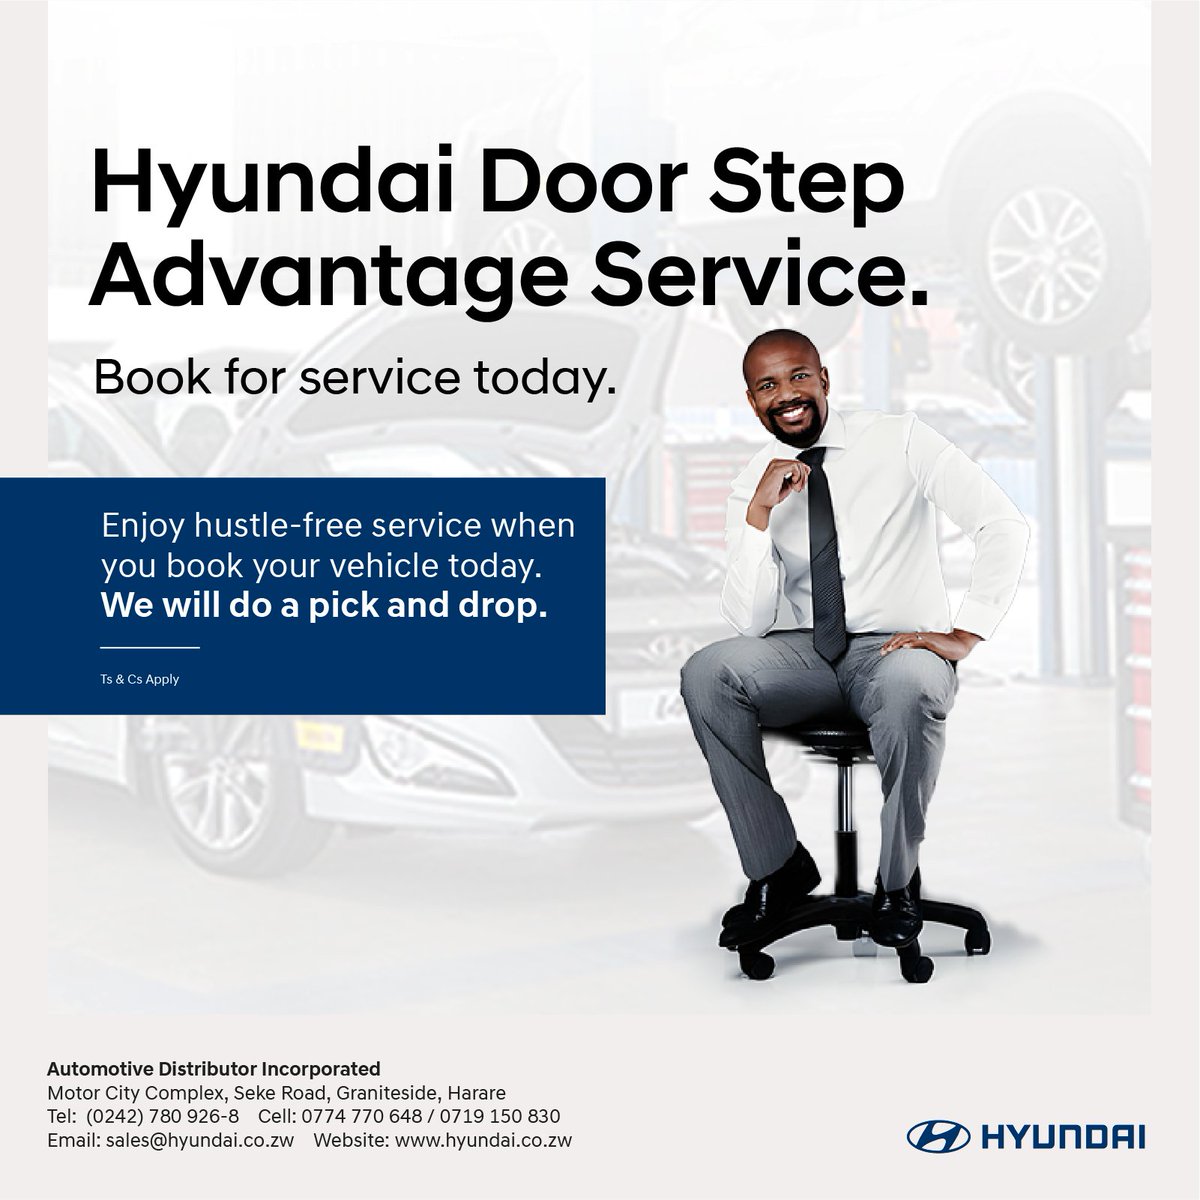 Are you having a busy day at work/home? Just book your vehicle for service and we will pick it up and bring it back at no cost. Ts and Cs apply. #hyundaipickanddropservice #aftersalesefficiency